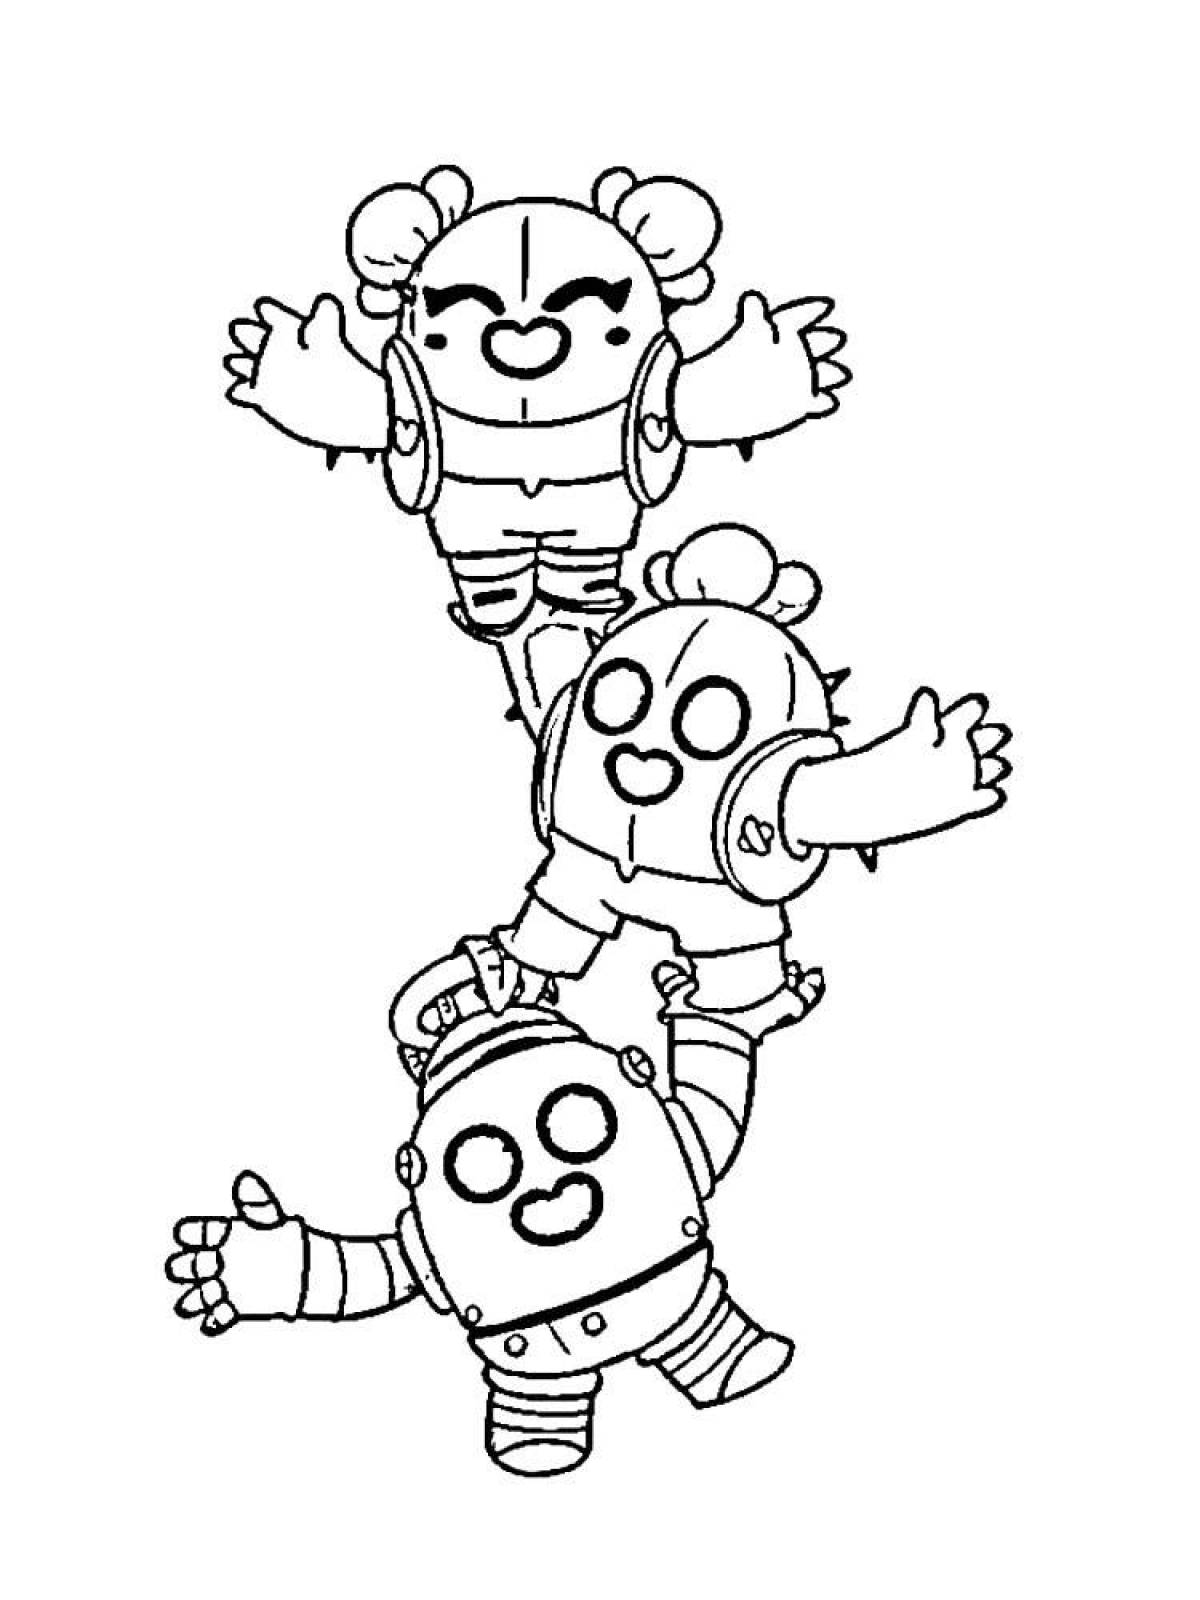 Awesome bravo stars spike coloring pages